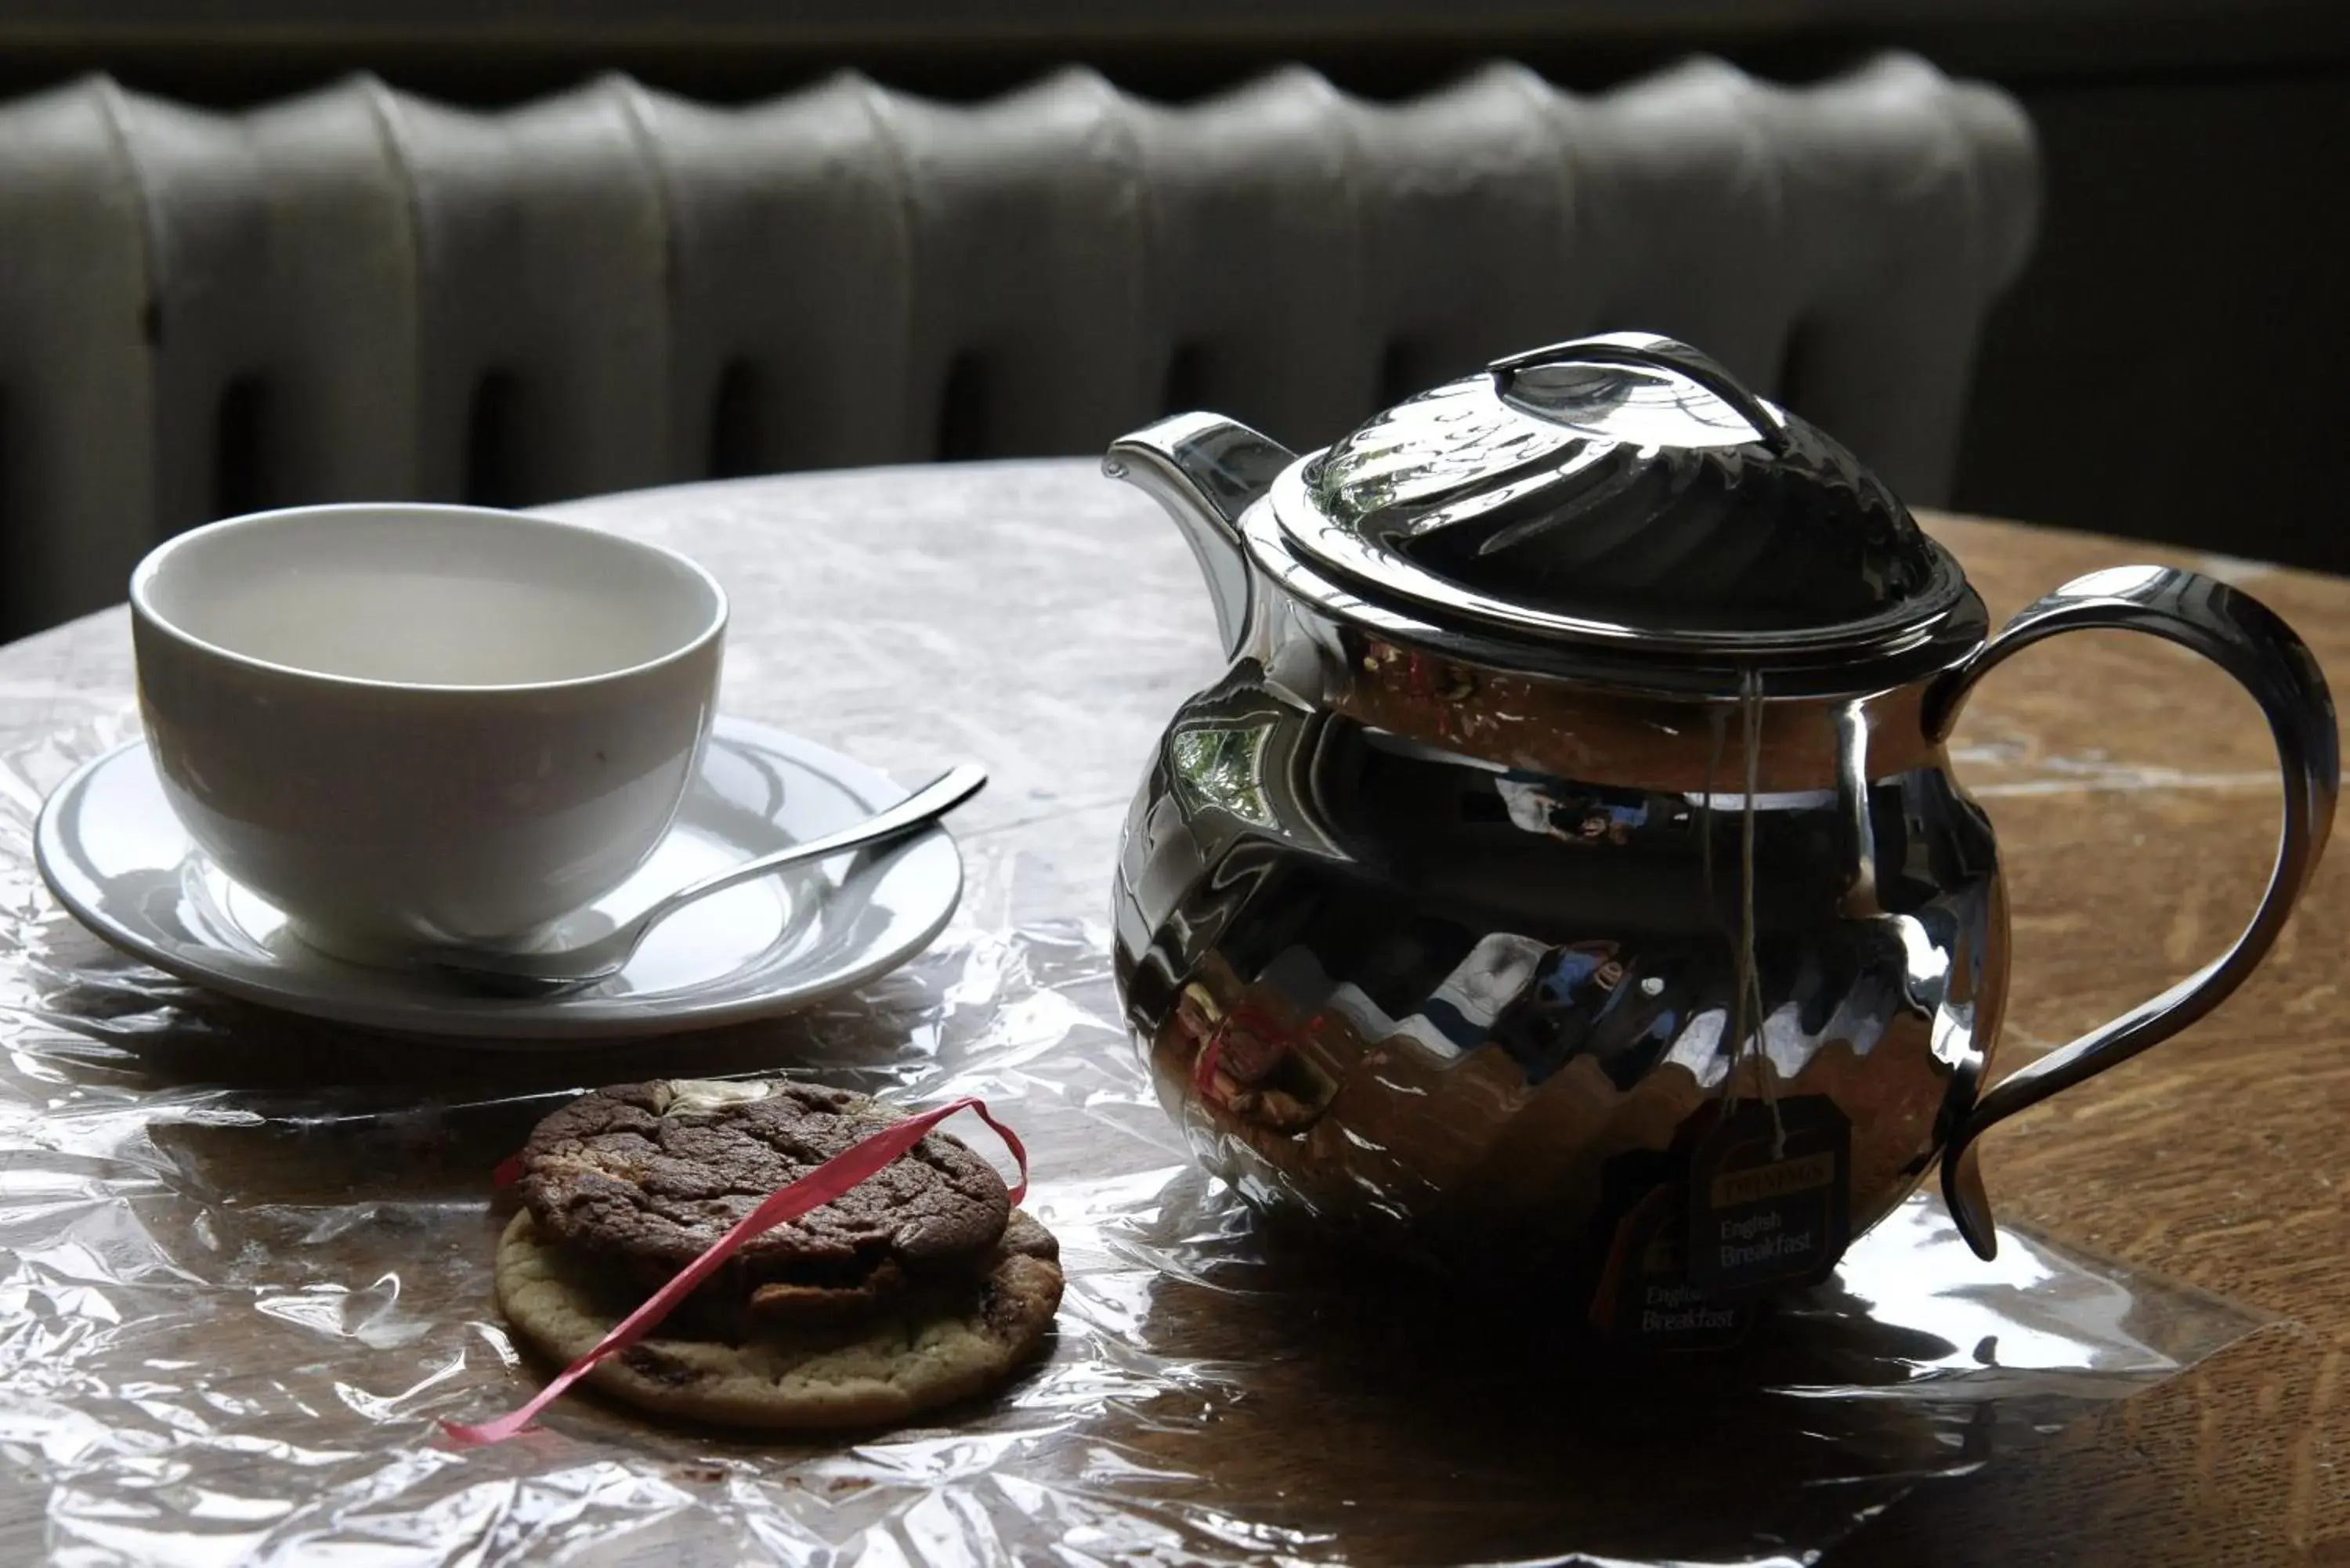 Coffee/tea facilities in Cotswold House Hotel and Spa - "A Bespoke Hotel"